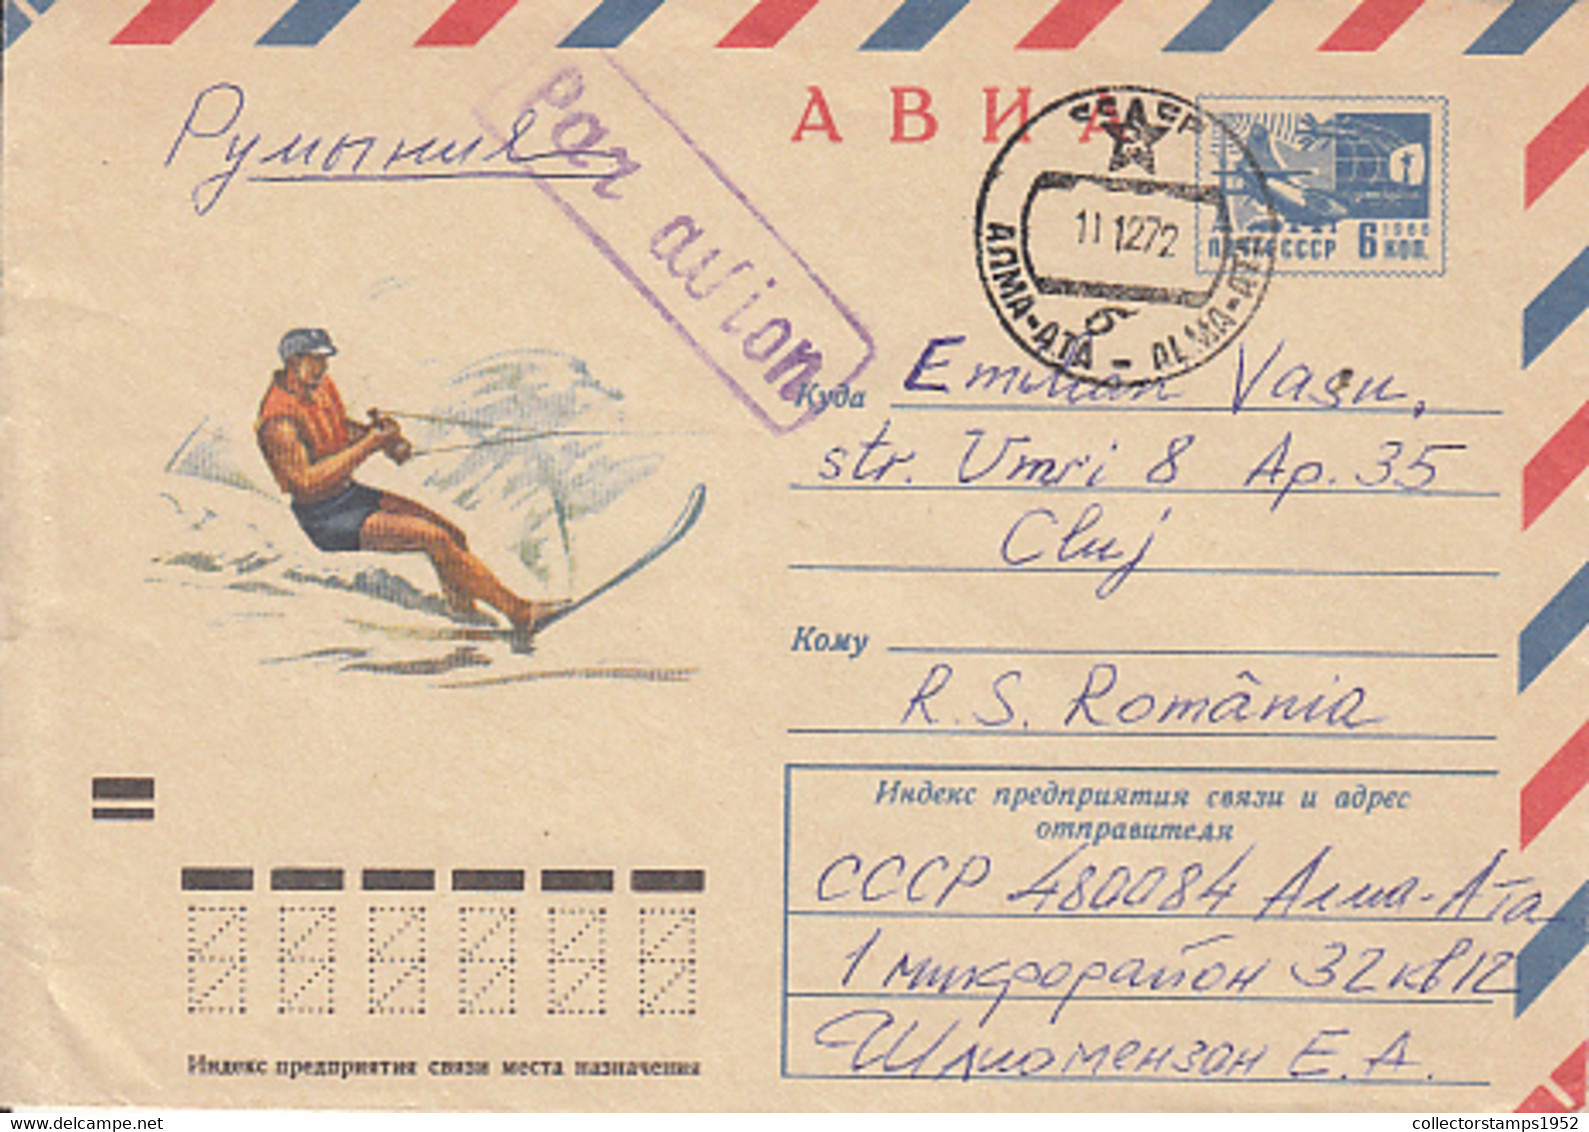 93284- WATER SKIING, SPORTS, COVER STATIONERY, 1972, RUSSIA-USSR - Waterski